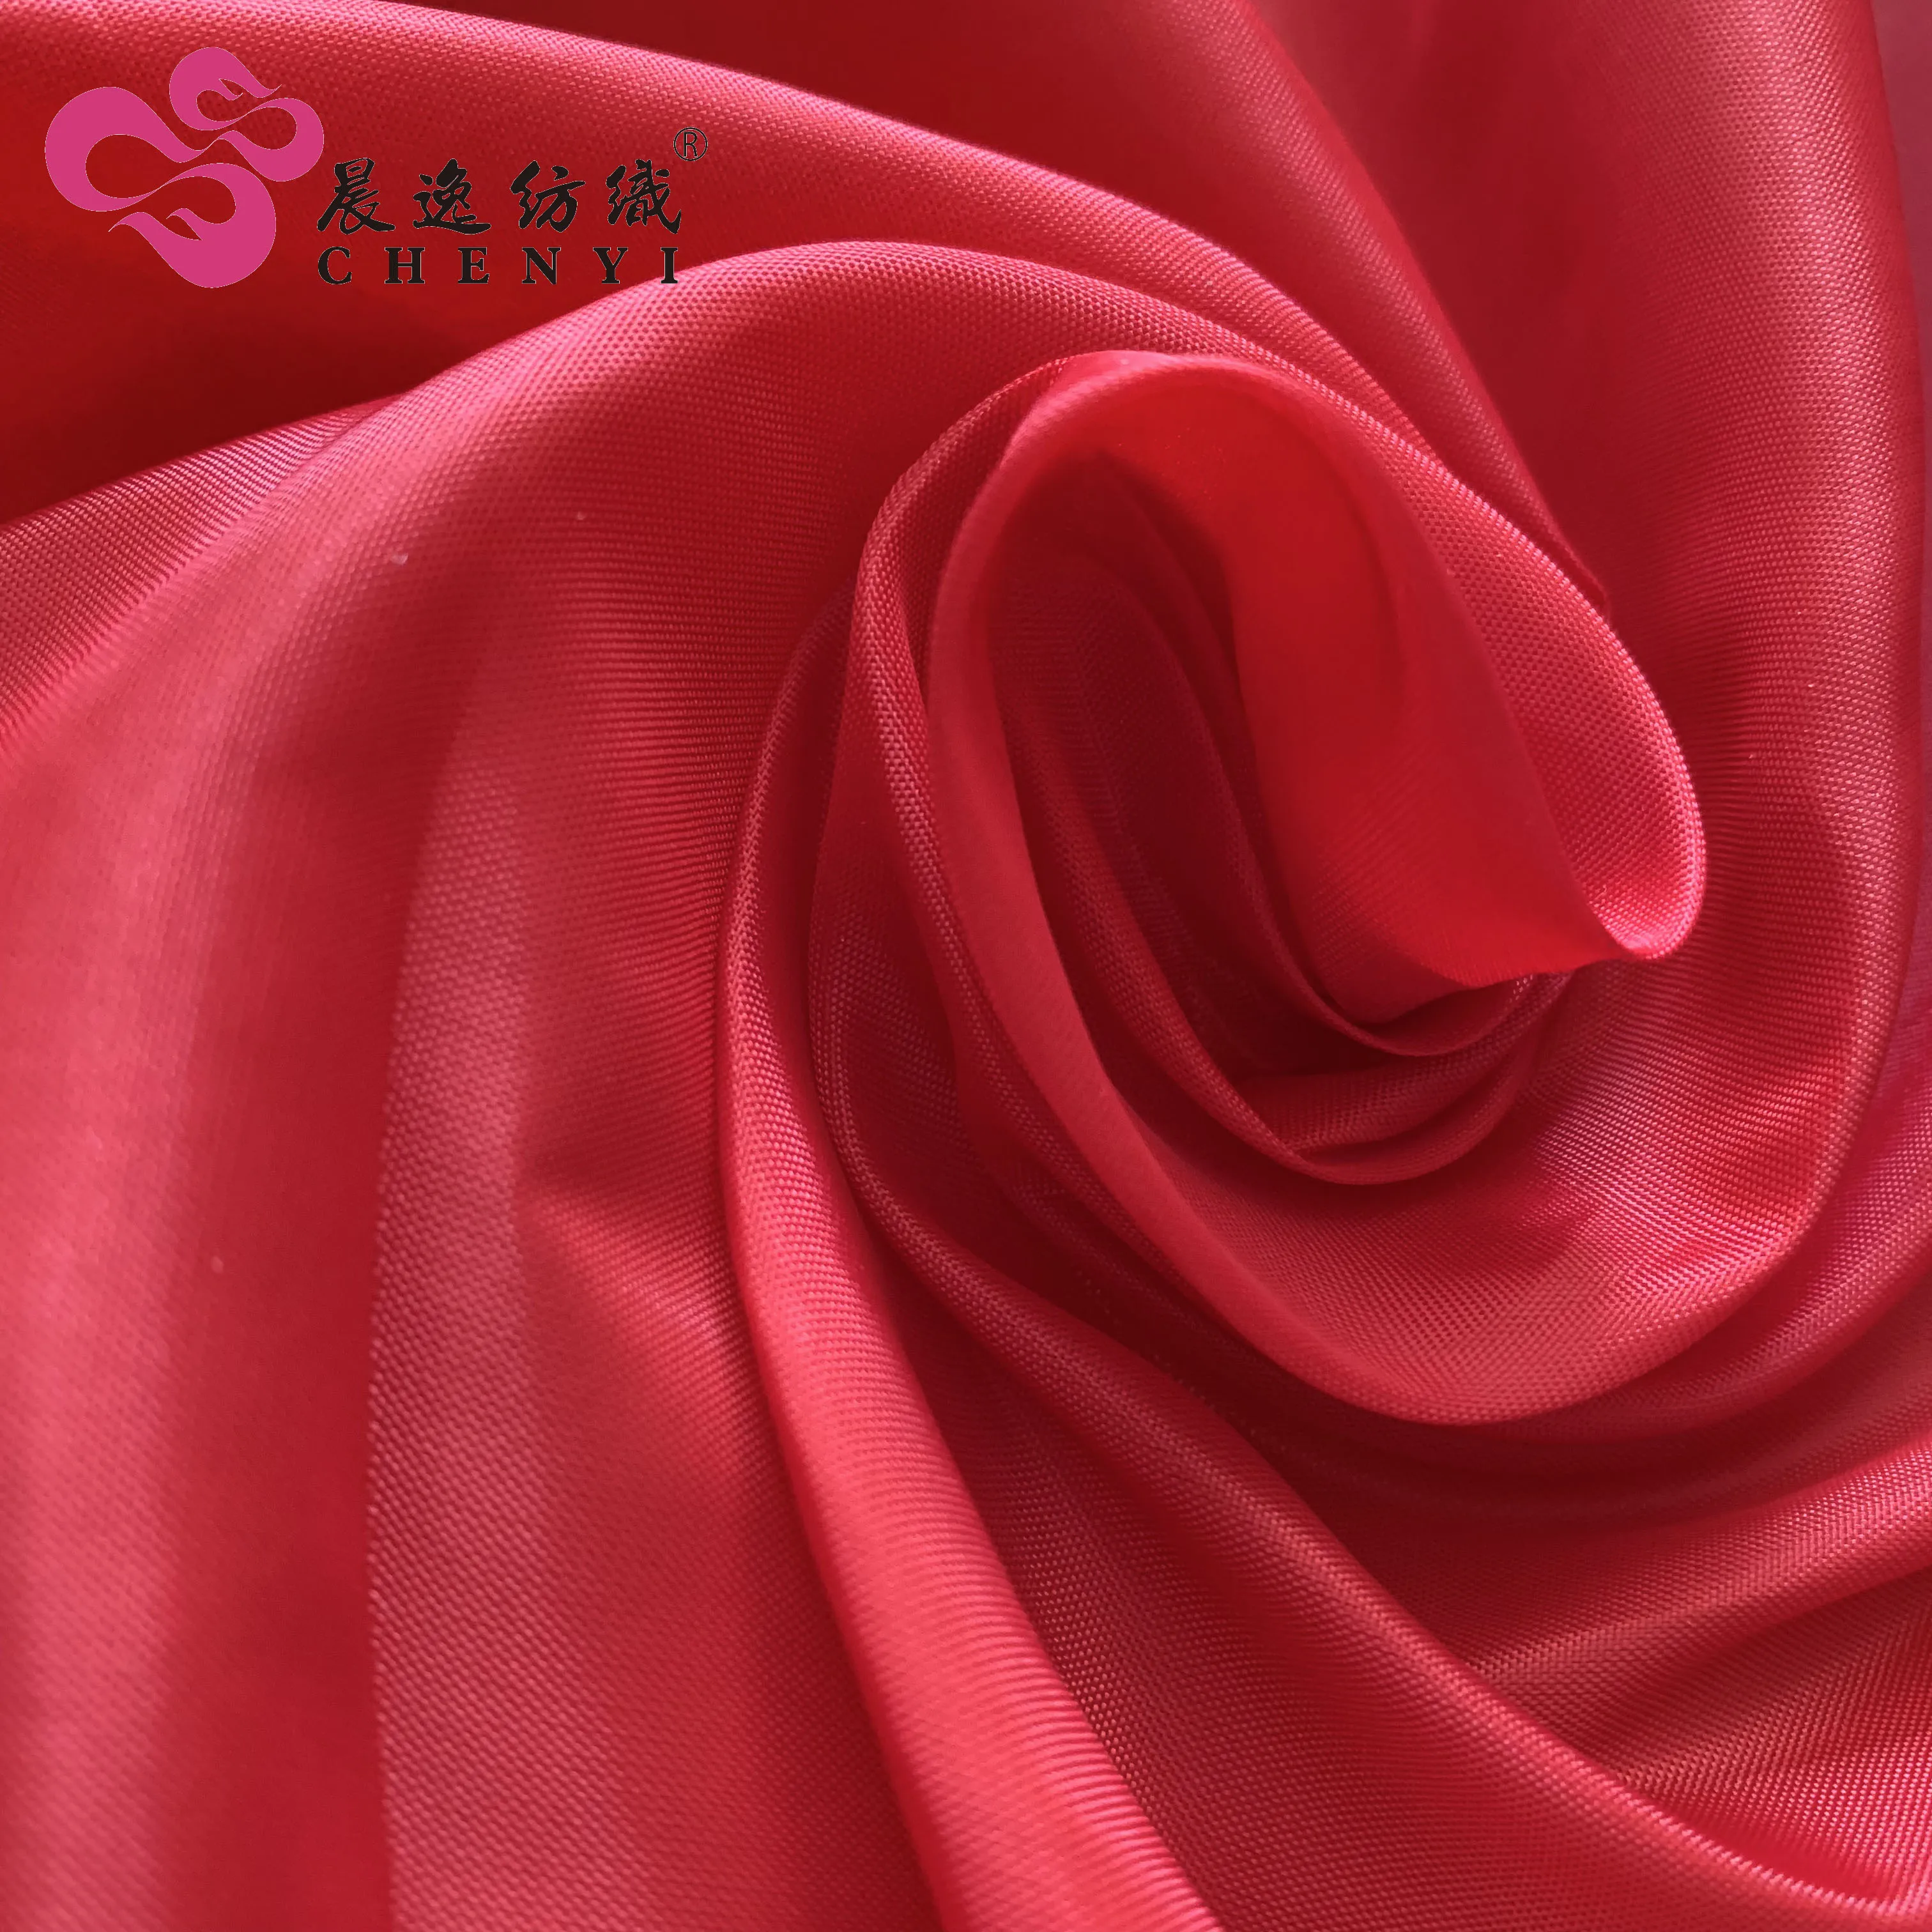 
hangzhou textiles 100% polyester lining fabric 